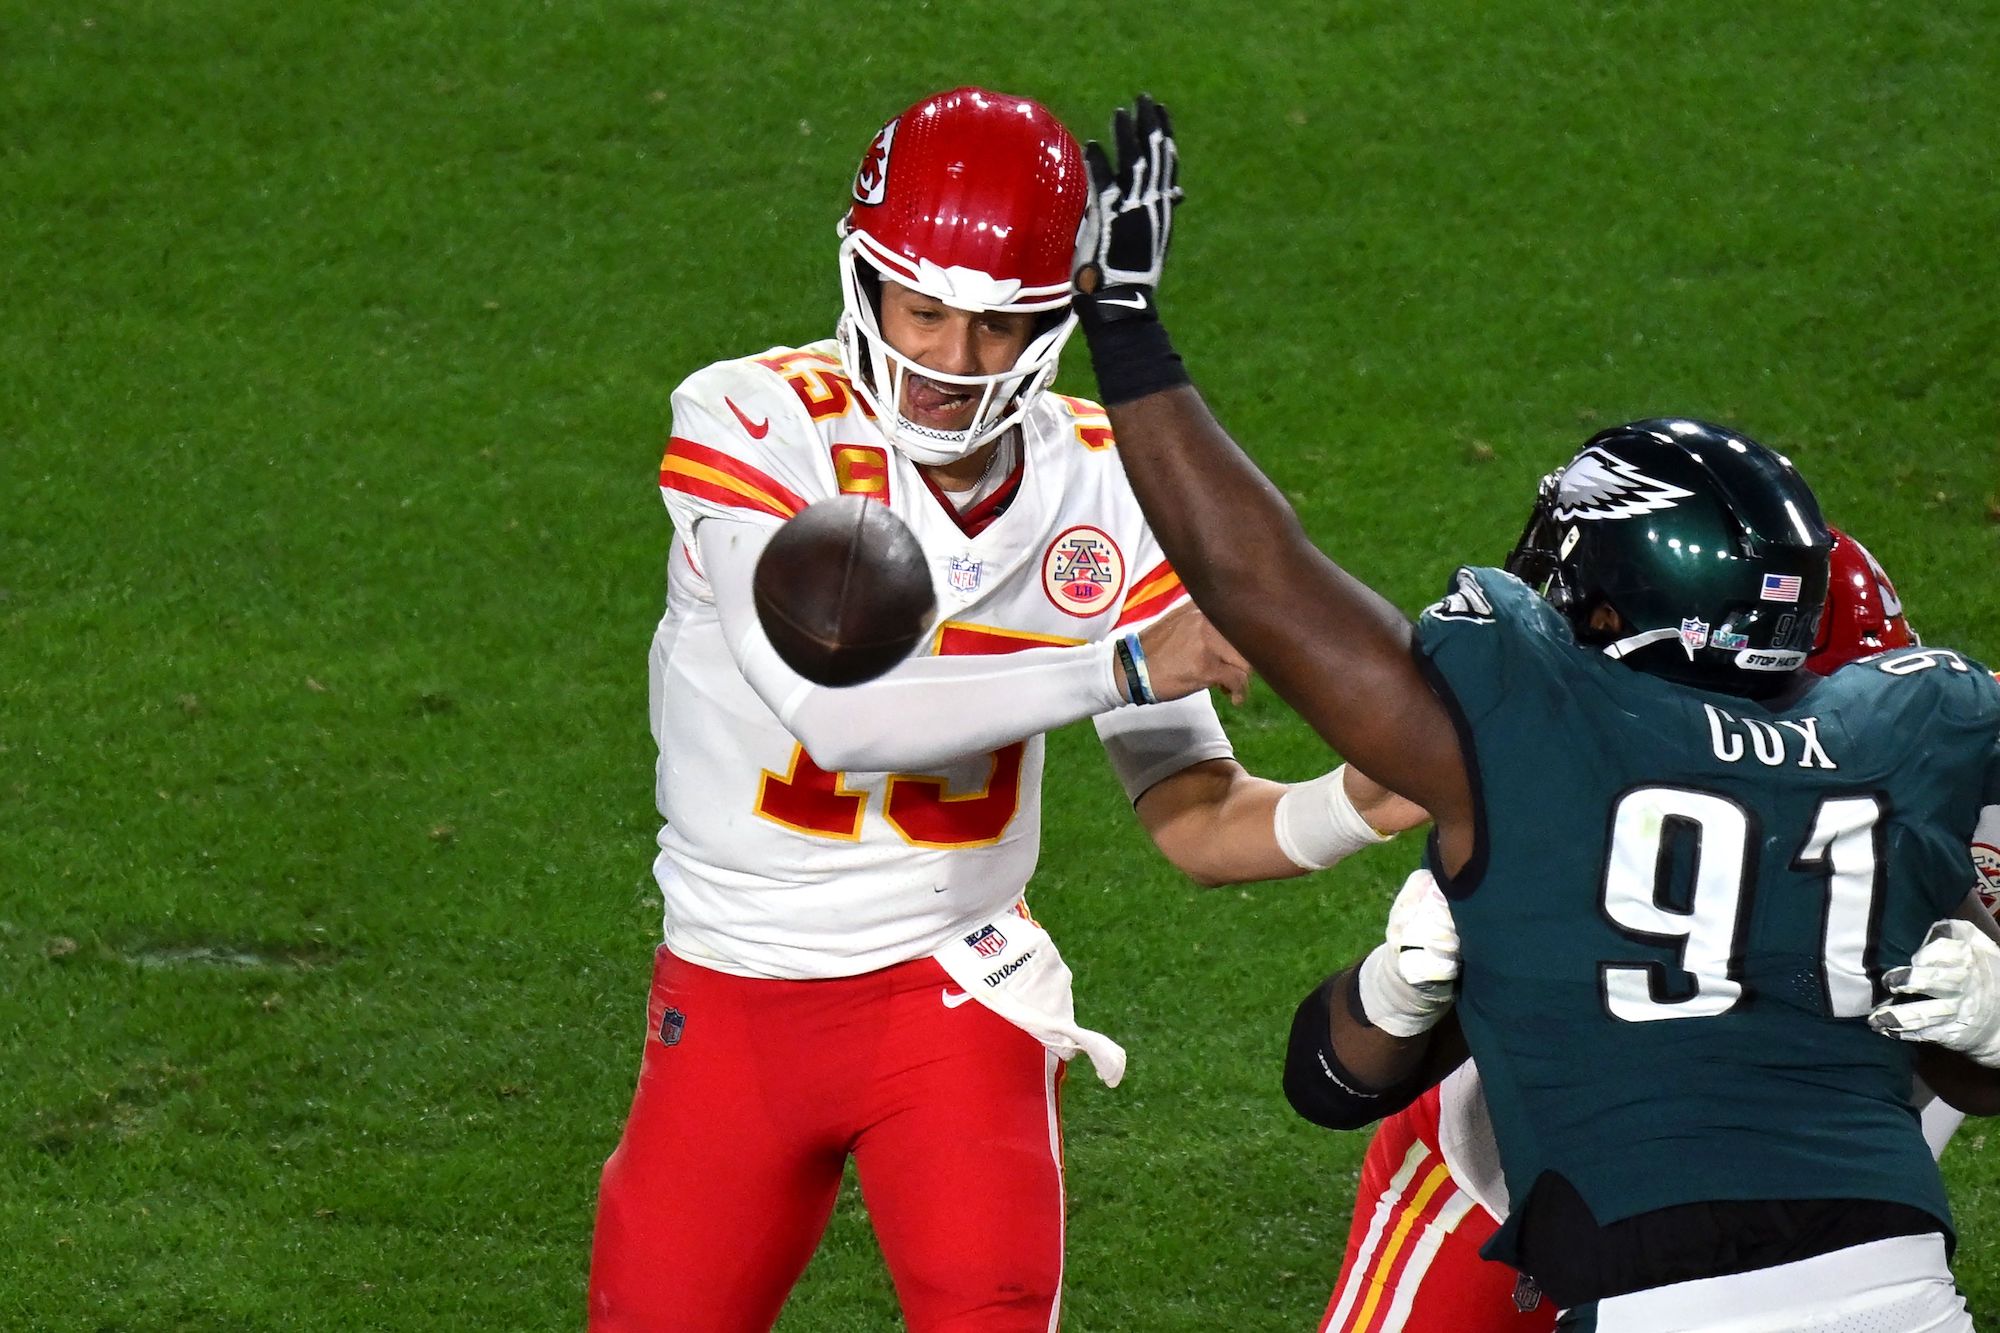 Chiefs vs. Eagles Super Bowl 57 schedule, TV, announcers, how to watch